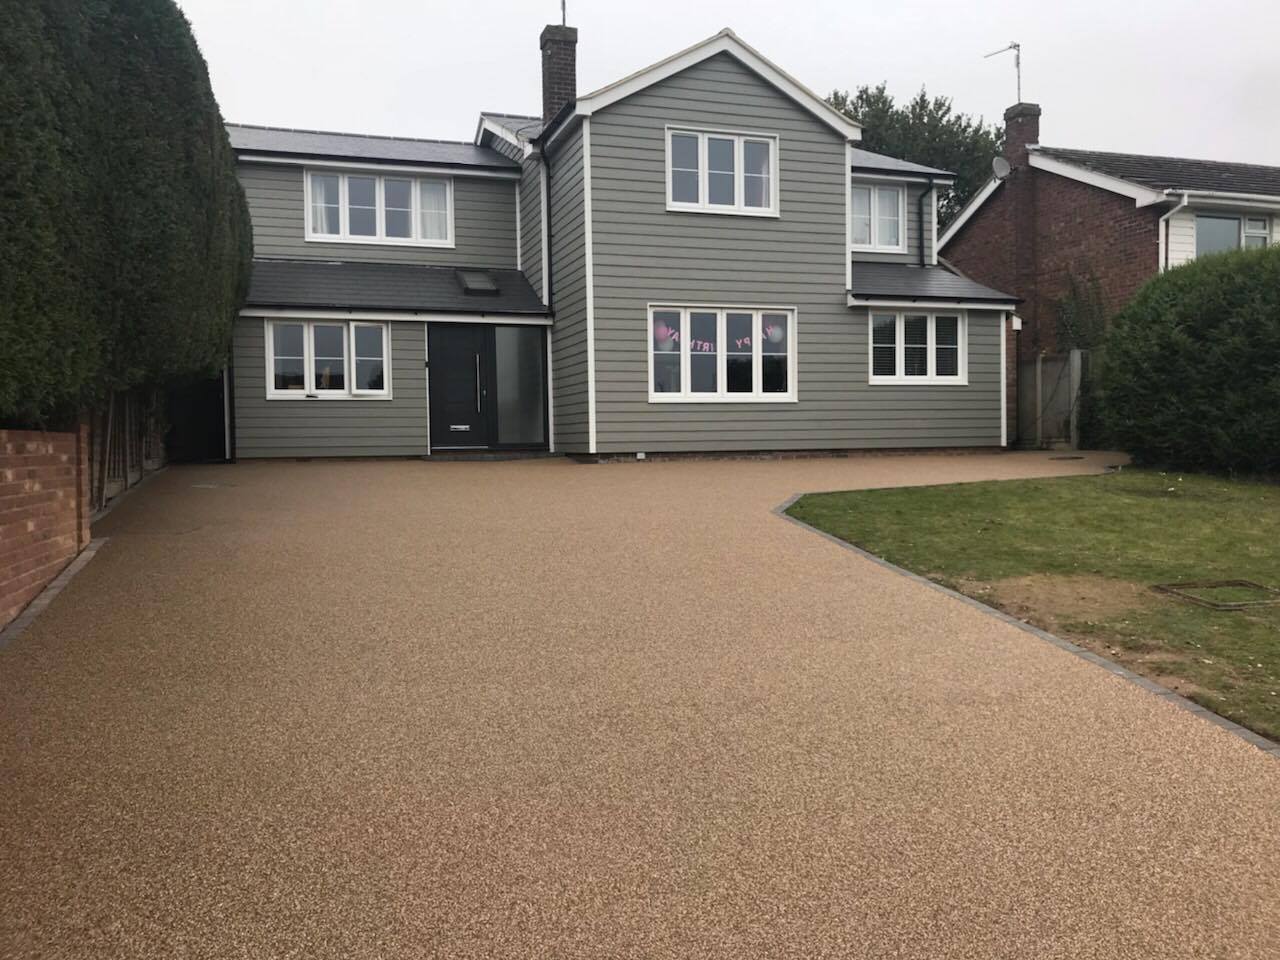 How Much Does a Resin Bound Driveway Cost? - Ace Resin